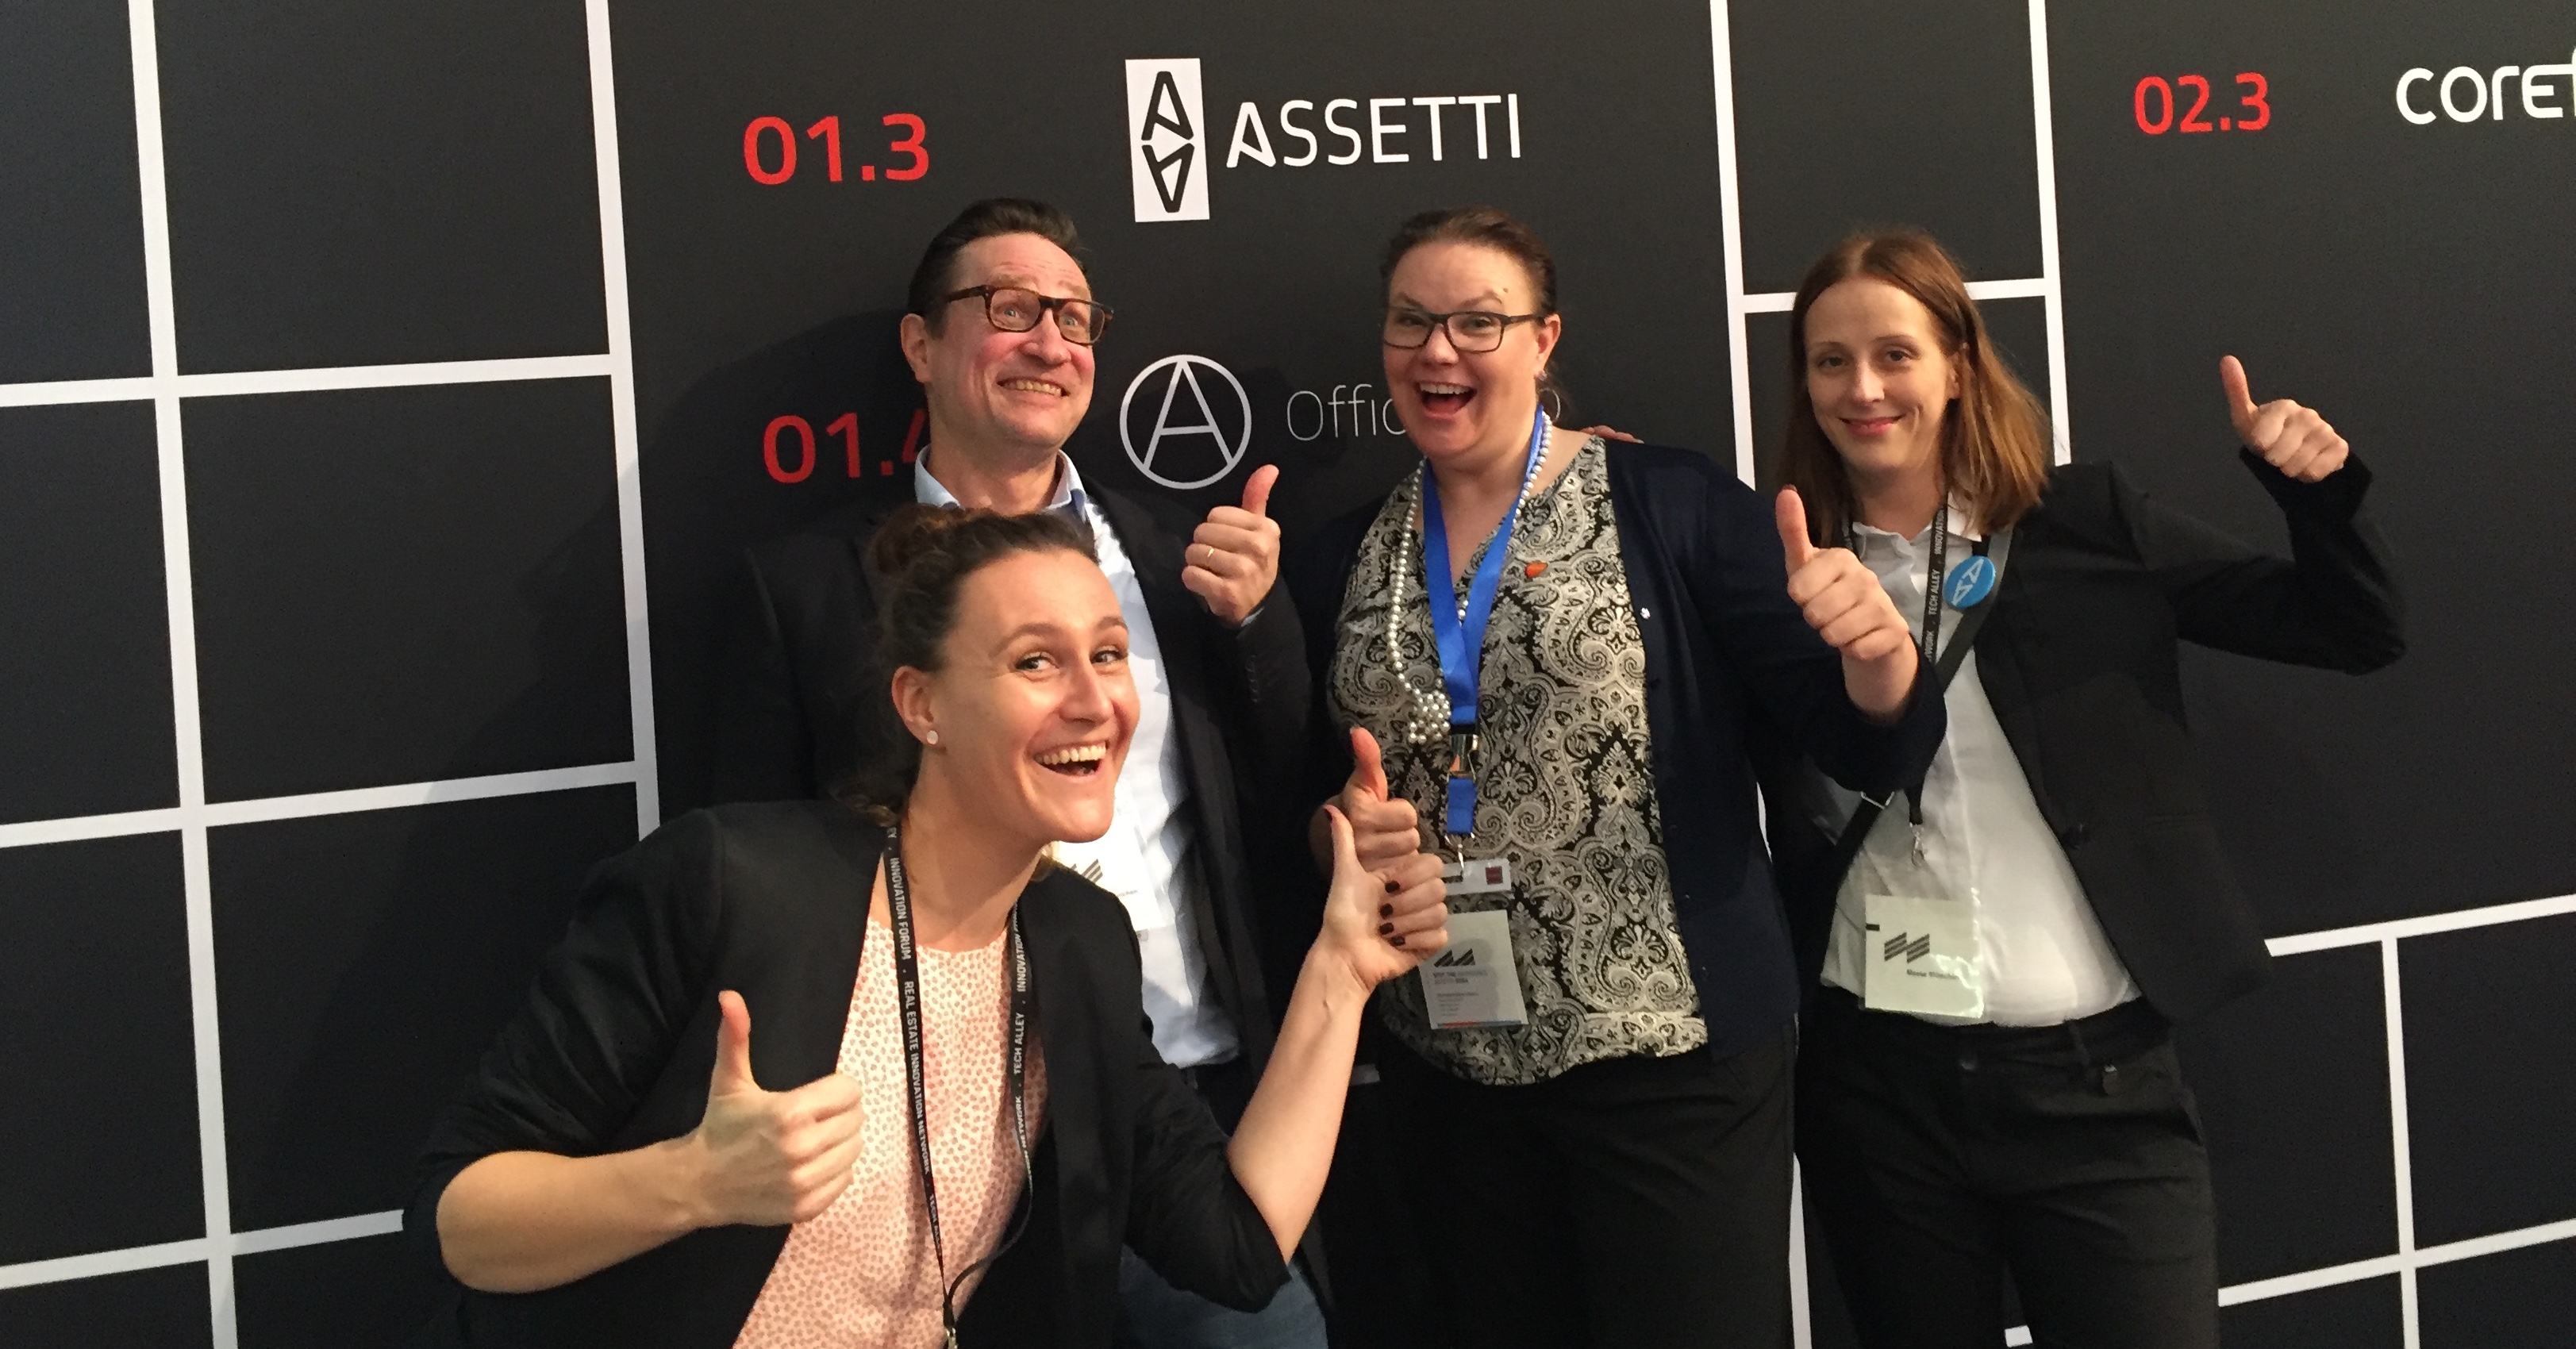 Assetti at European PropTech events